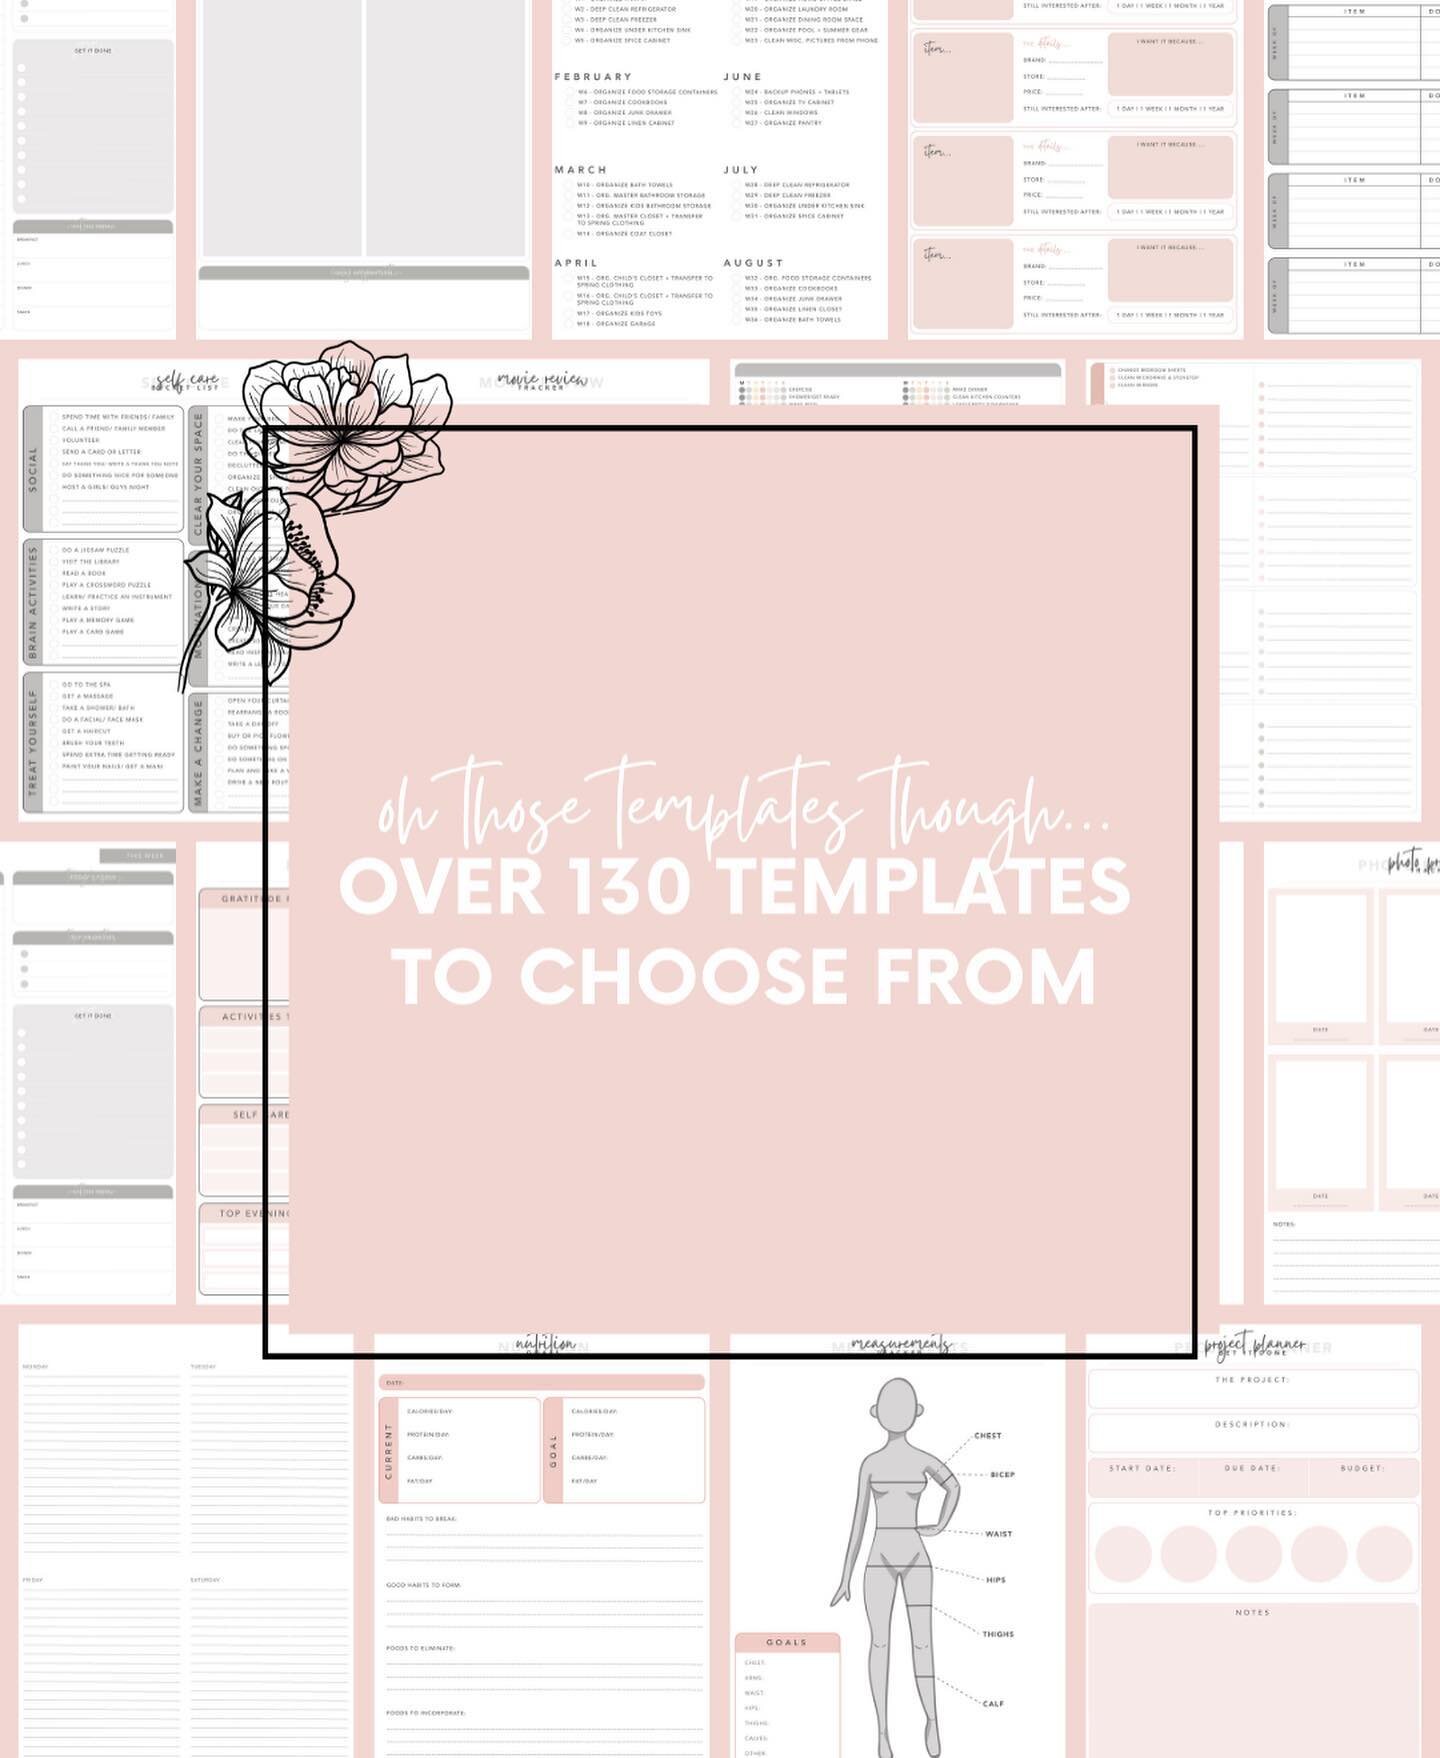 The Lifestyle Planner is designed to be flexible - allowing you to customize the planner to fit your needs with over 130 templates that come with the planner!⁠
⁠
⁠
#digitalplanning #digitalplannerspreads #plannerinspiration #paperlessplanning #digita